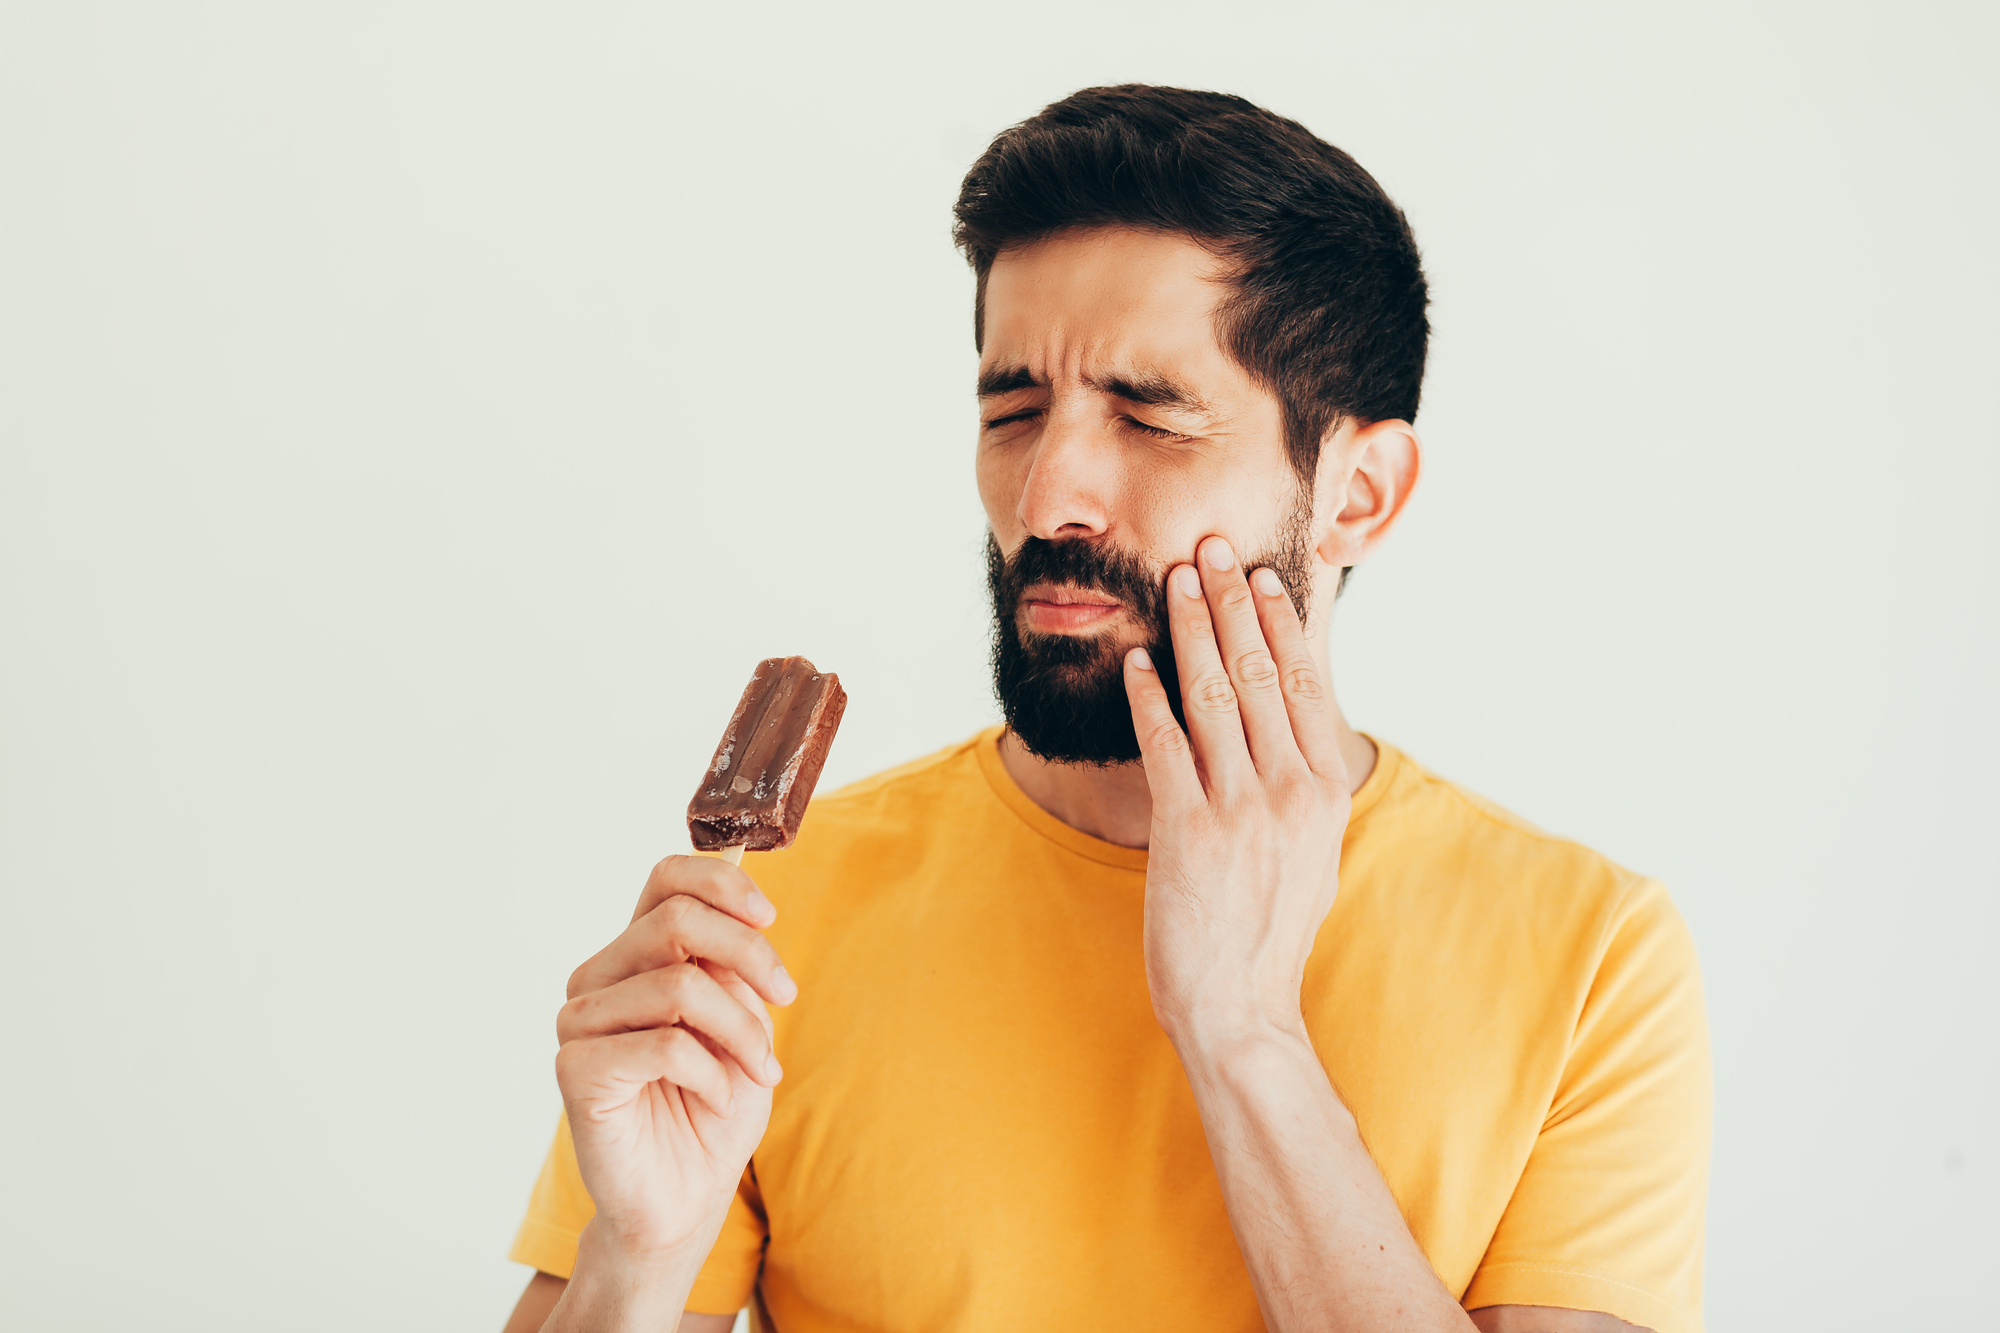 man wincing in pain while eating ice cream